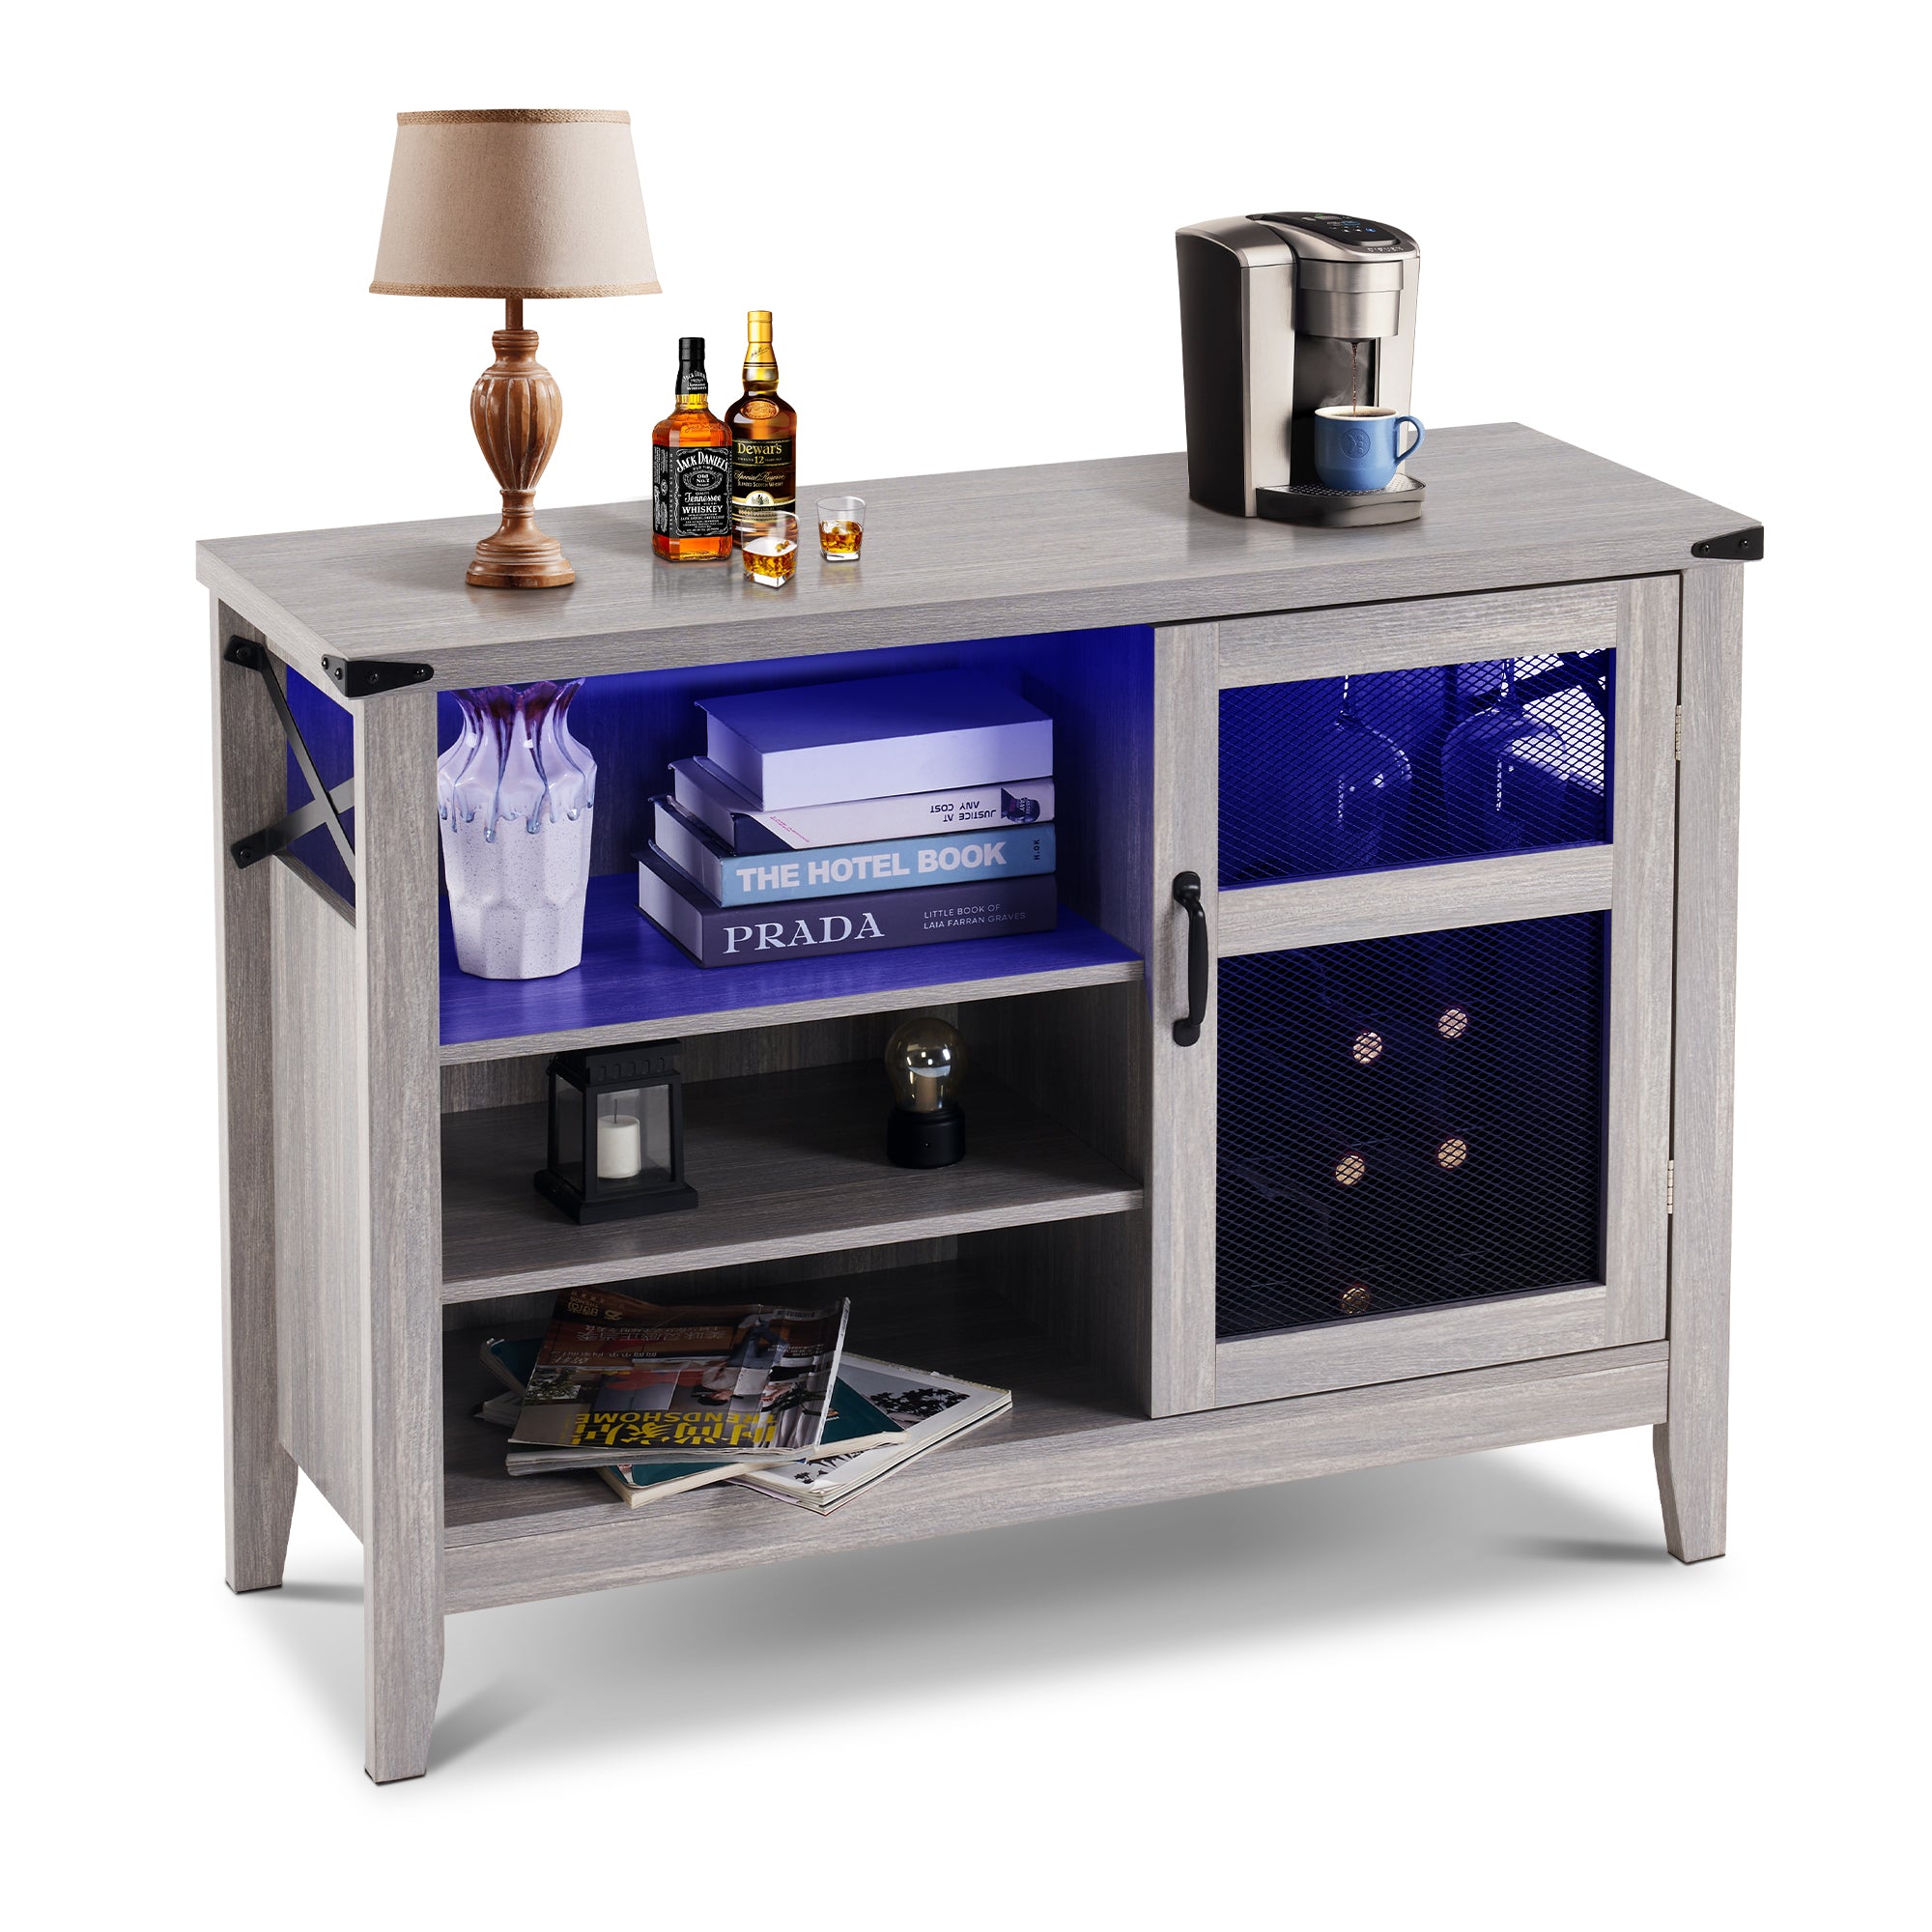 Ivinta Wine Bar Cabinet with LED Lights, Industrial Wine Cabinet for Liquor and Glasses, Rustic Wood Coffee Bar Cabinet